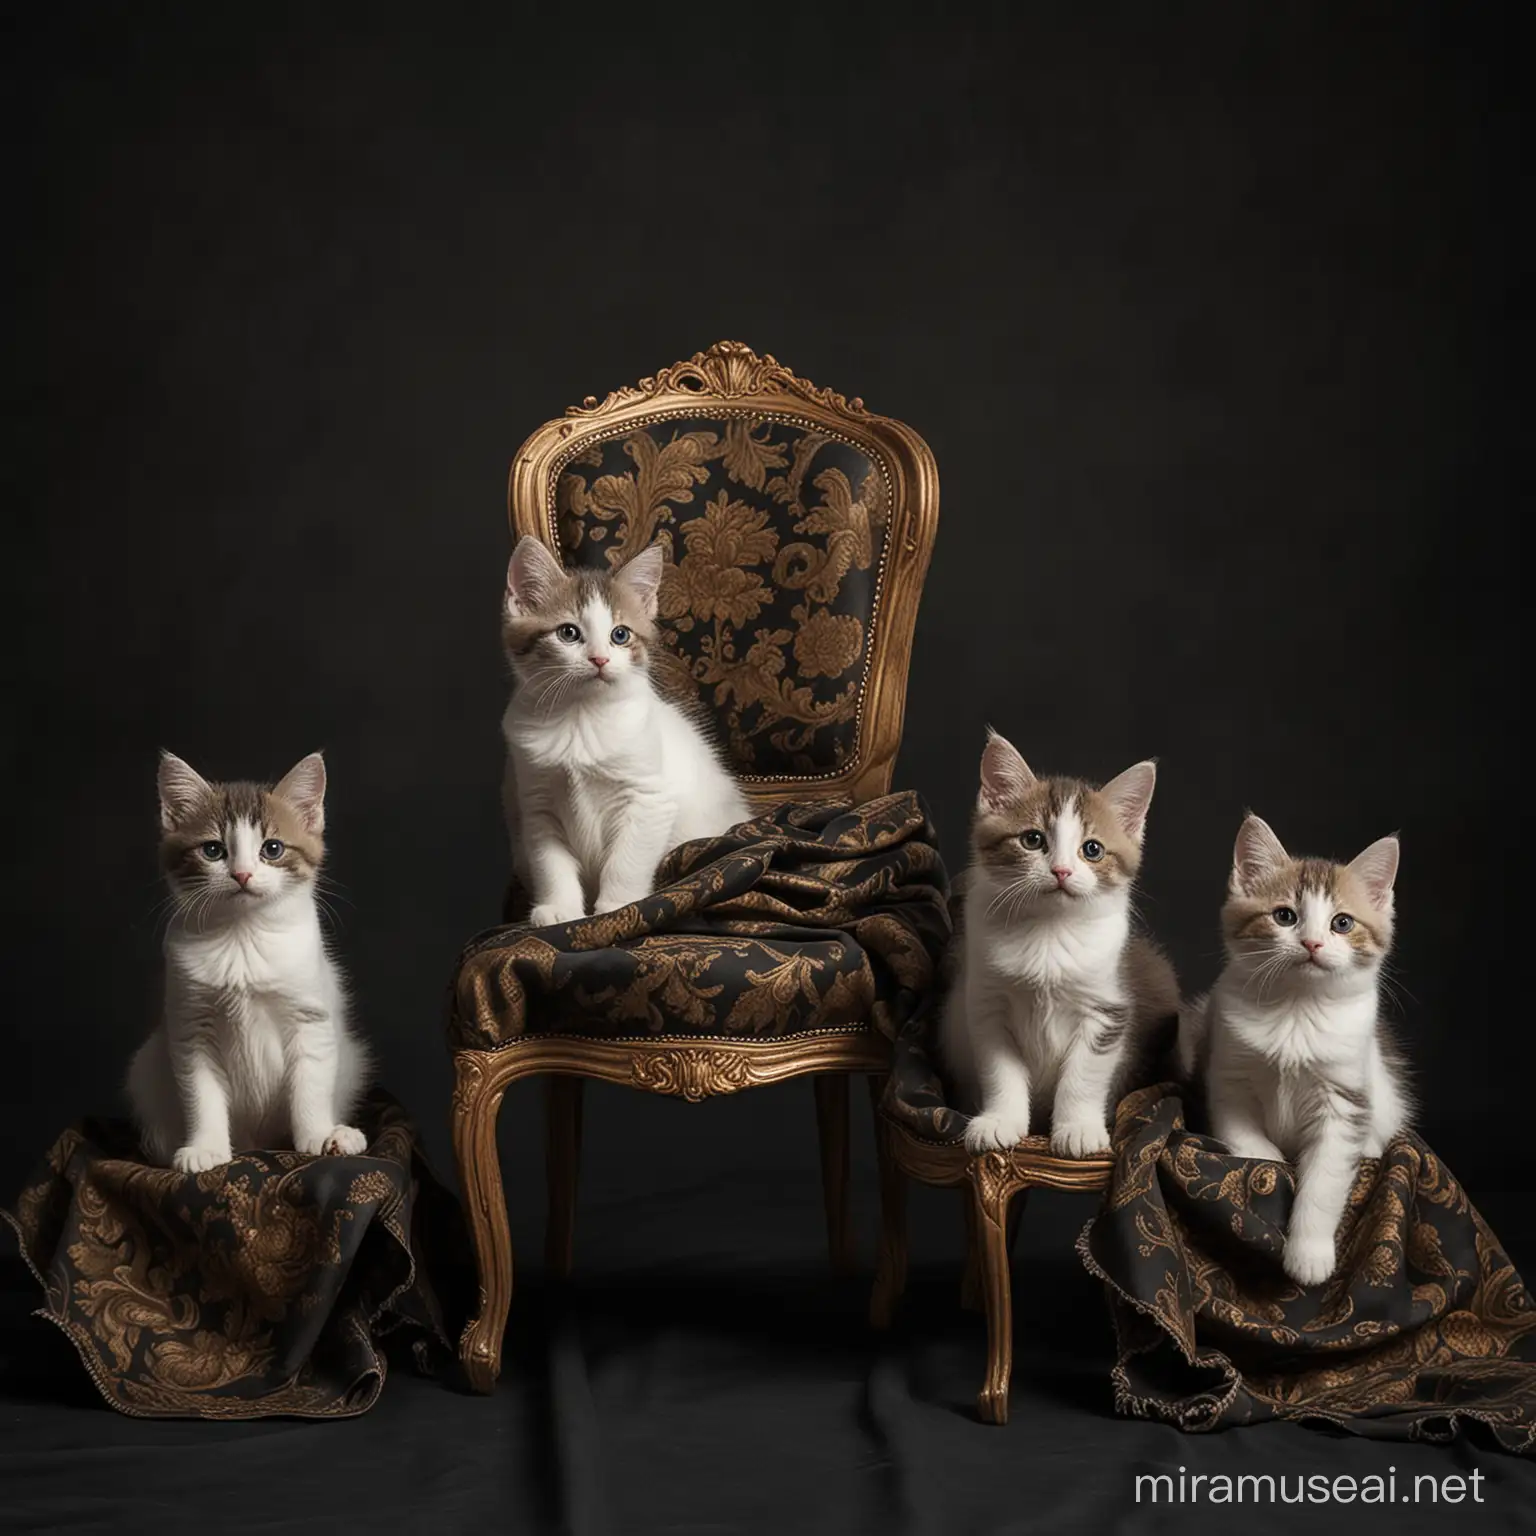 Baroque Style Dark Background with Chair and Cloths Featuring Five Kittens